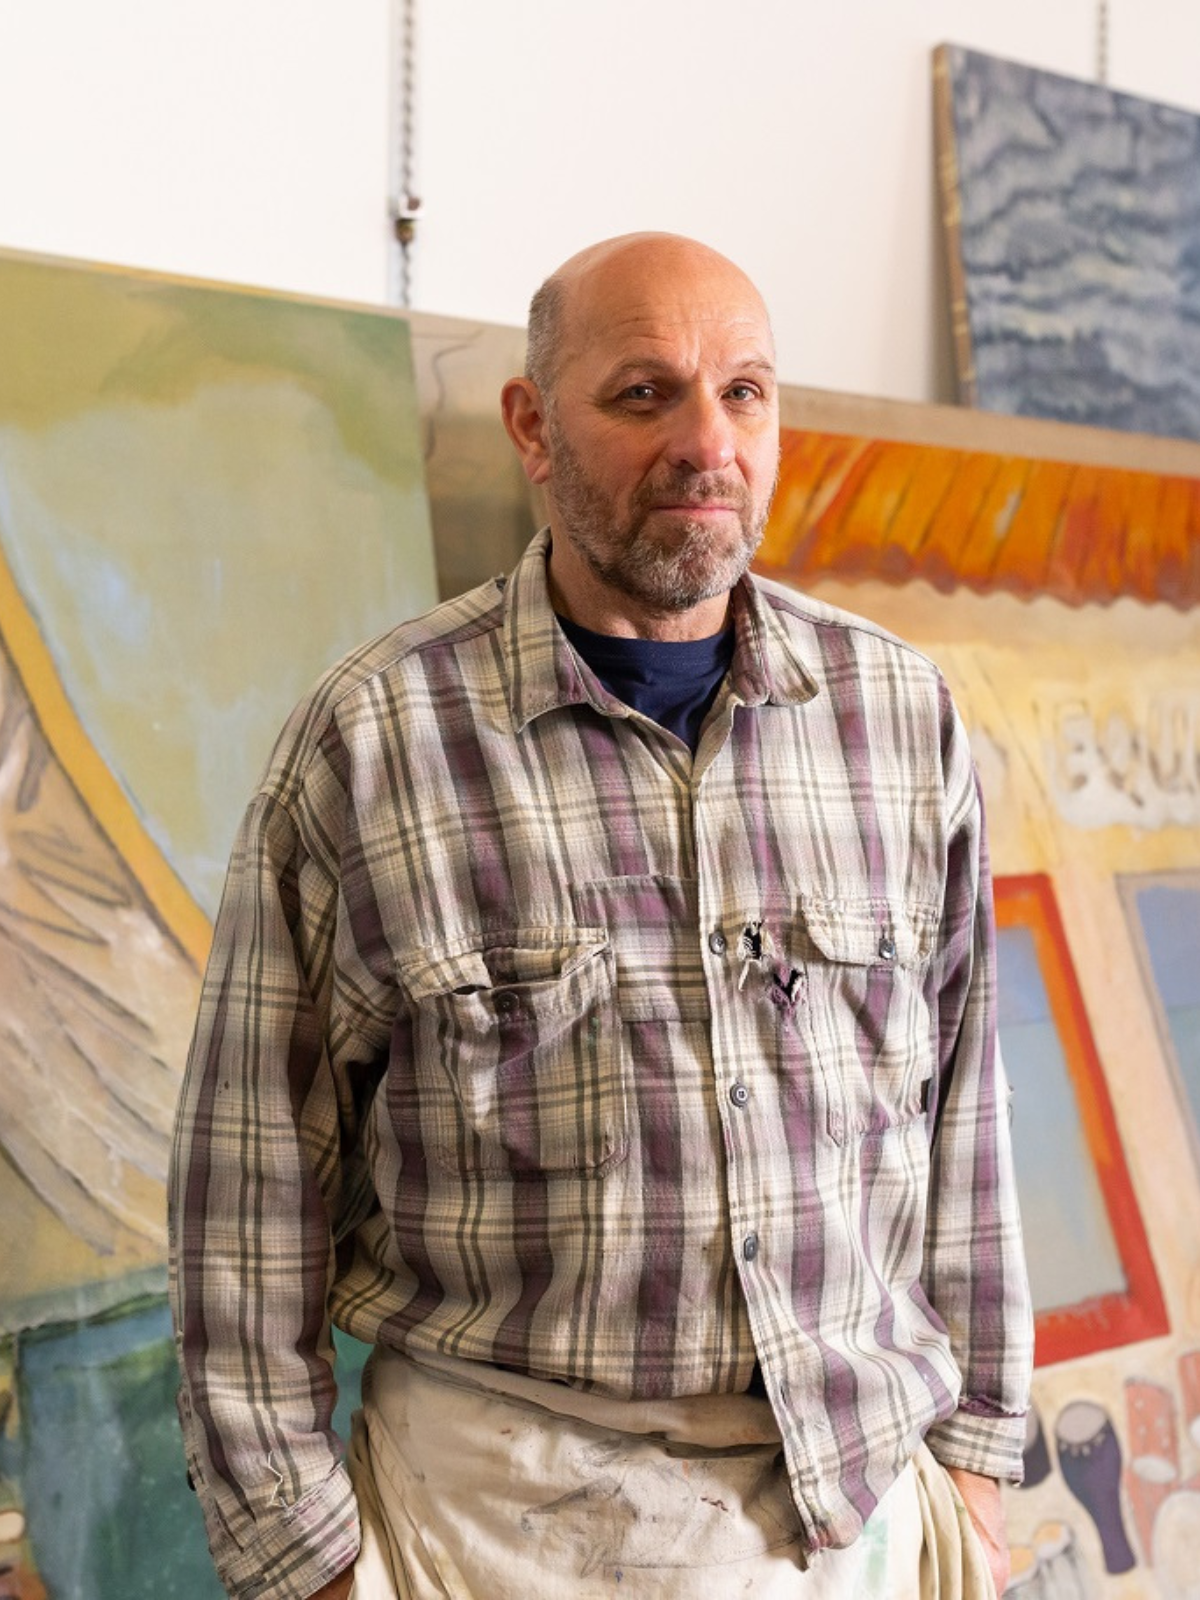 Peter Doig in studio with paintings